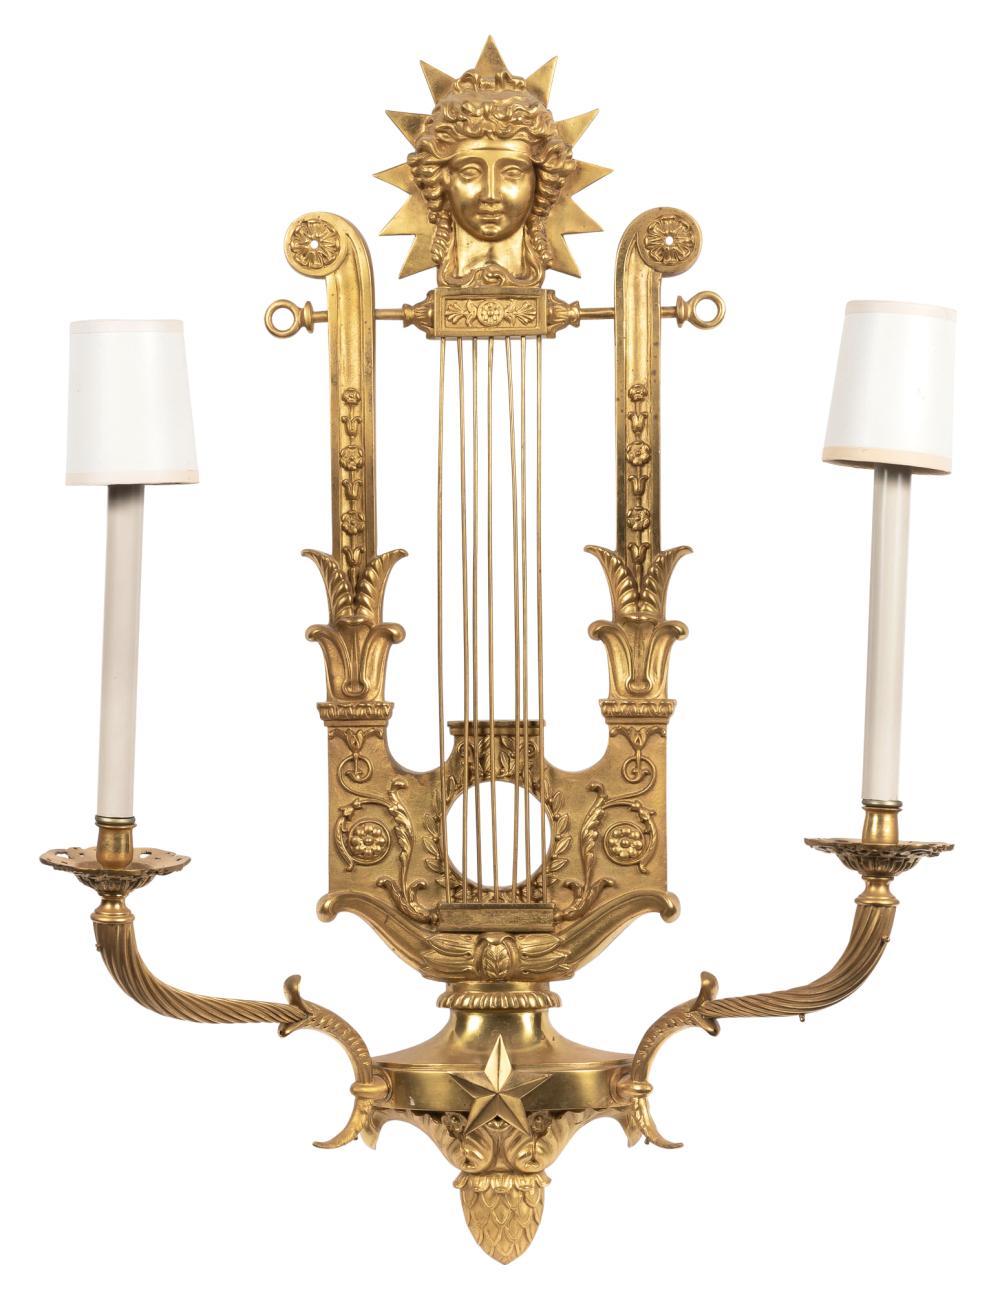 Pair of Empire style gilt-bronze two-light lyre sconces
Each pierced stringed lyre-form backplate with the mask of Apollo above two scrolling branches centered by a star over an acorn pendant.

Provenance:
Maison Tisserand, Paris.

C Property